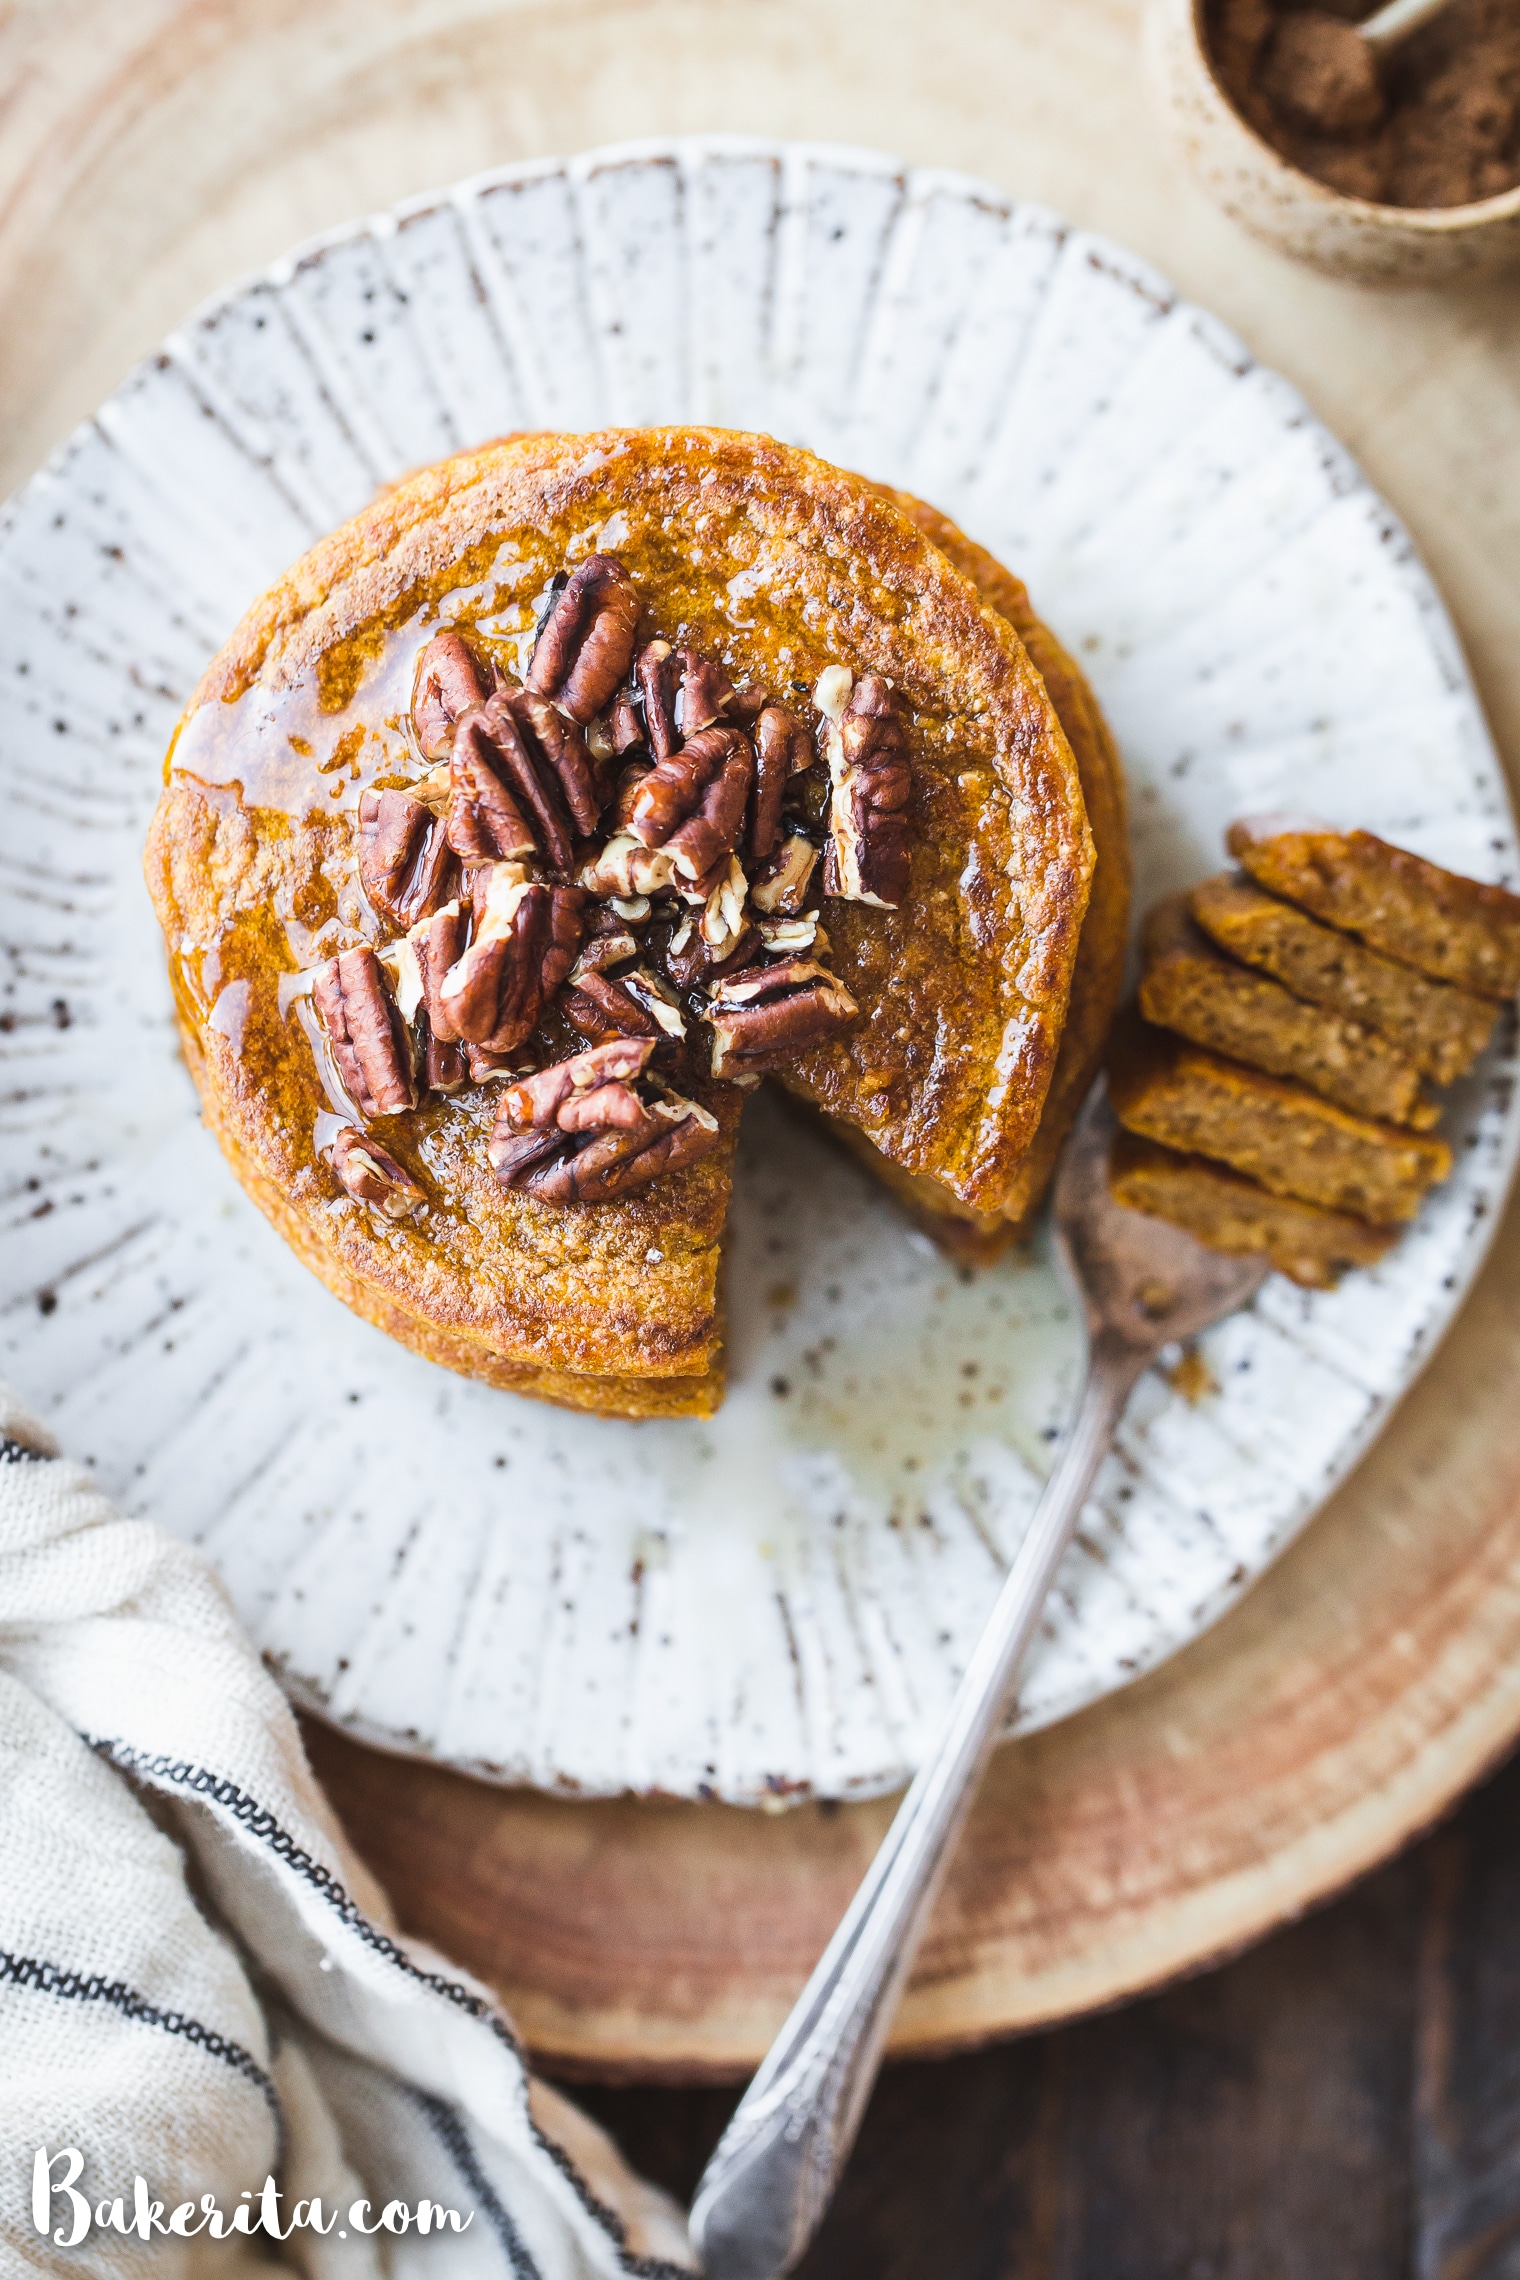 These Gluten-Free Vegan Pumpkin Pancakes tastes like fall thanks to the warm pumpkin spices and maple syrup! They're easy-to-make, light, fluffy, and absolutely delicious. 